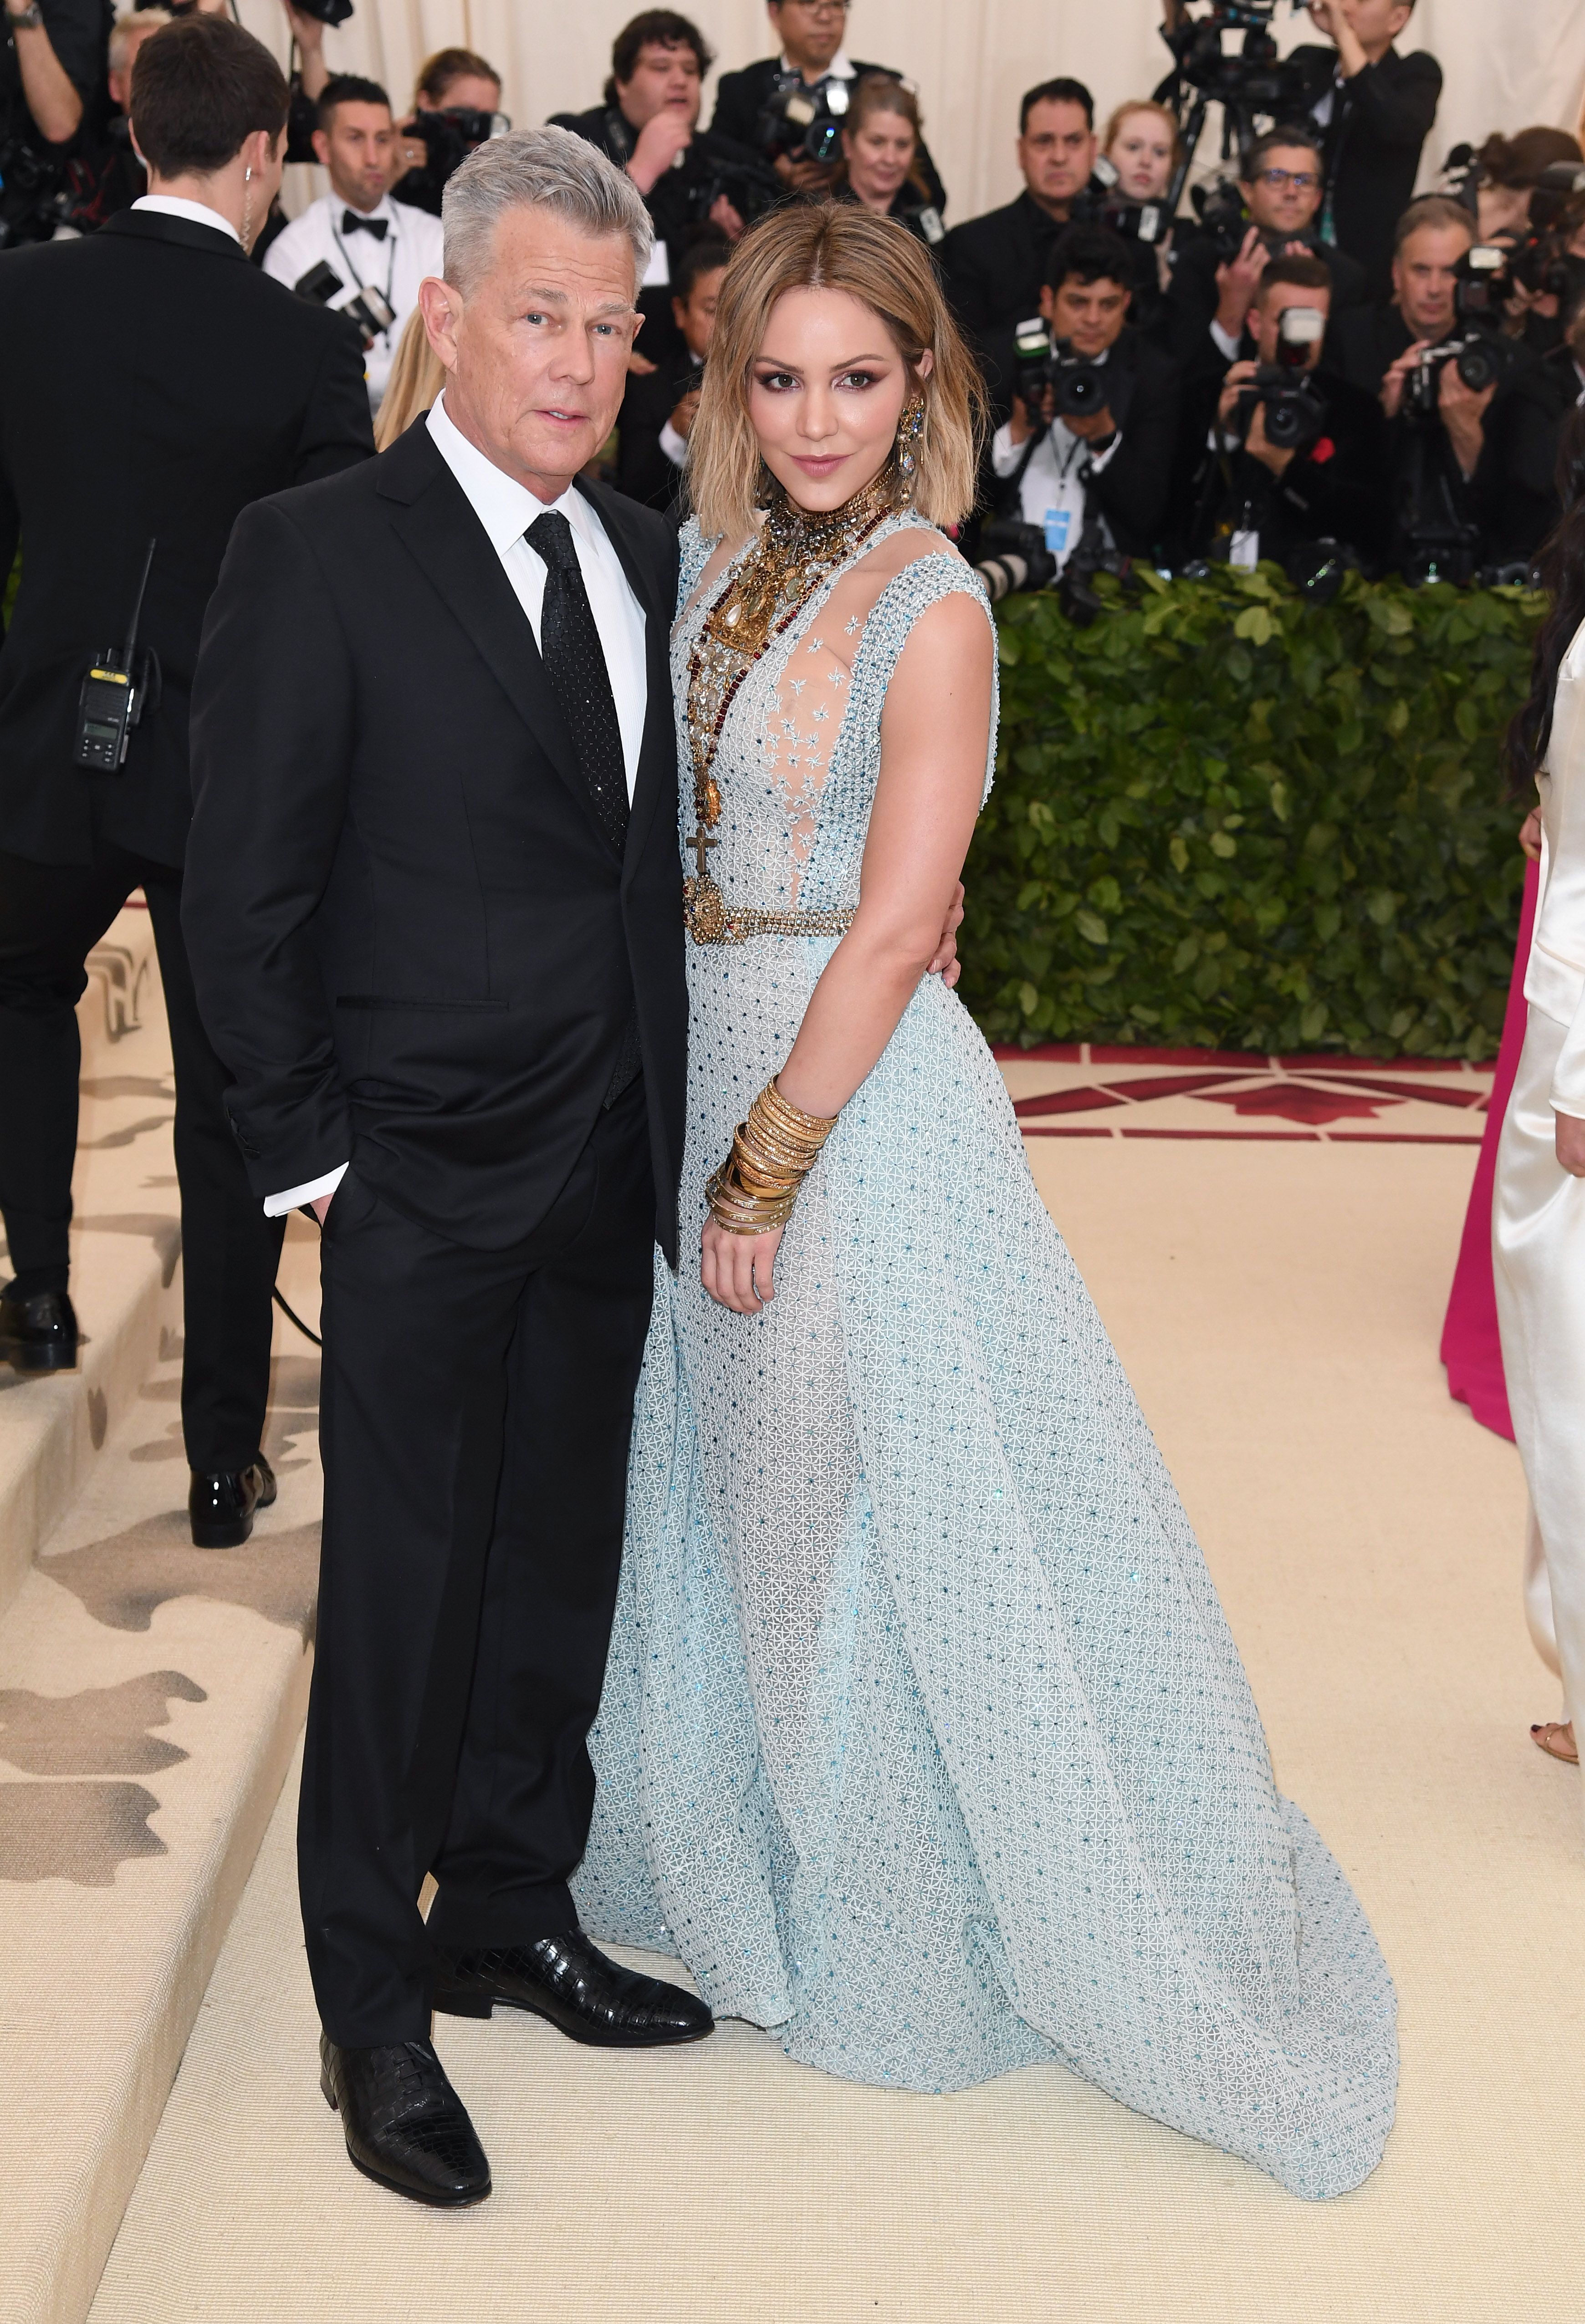 David Foster and Katharine McPhee during the Heavenly Bodies: Fashion & The Catholic Imagination Costume Institute Gala at Metropolitan Museum of Art on May 7, 2018 in New York City. | Source: Getty Images